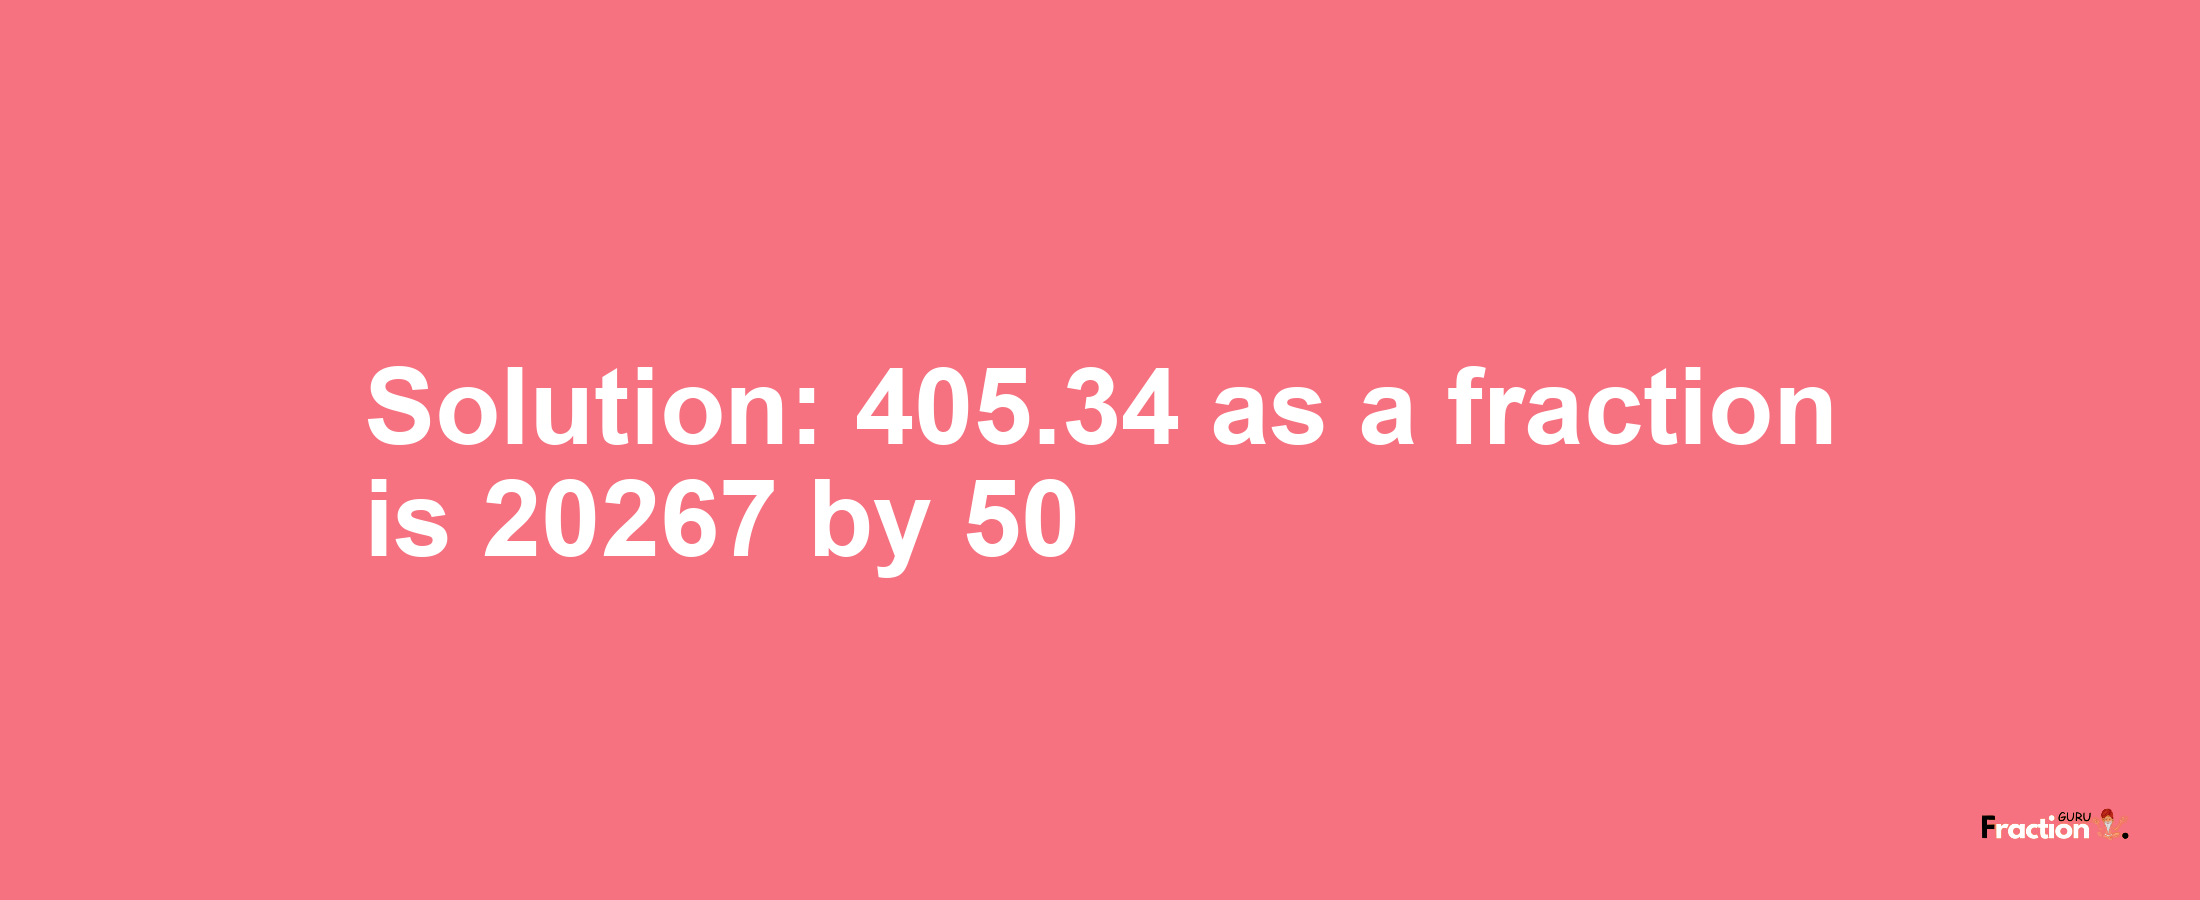 Solution:405.34 as a fraction is 20267/50